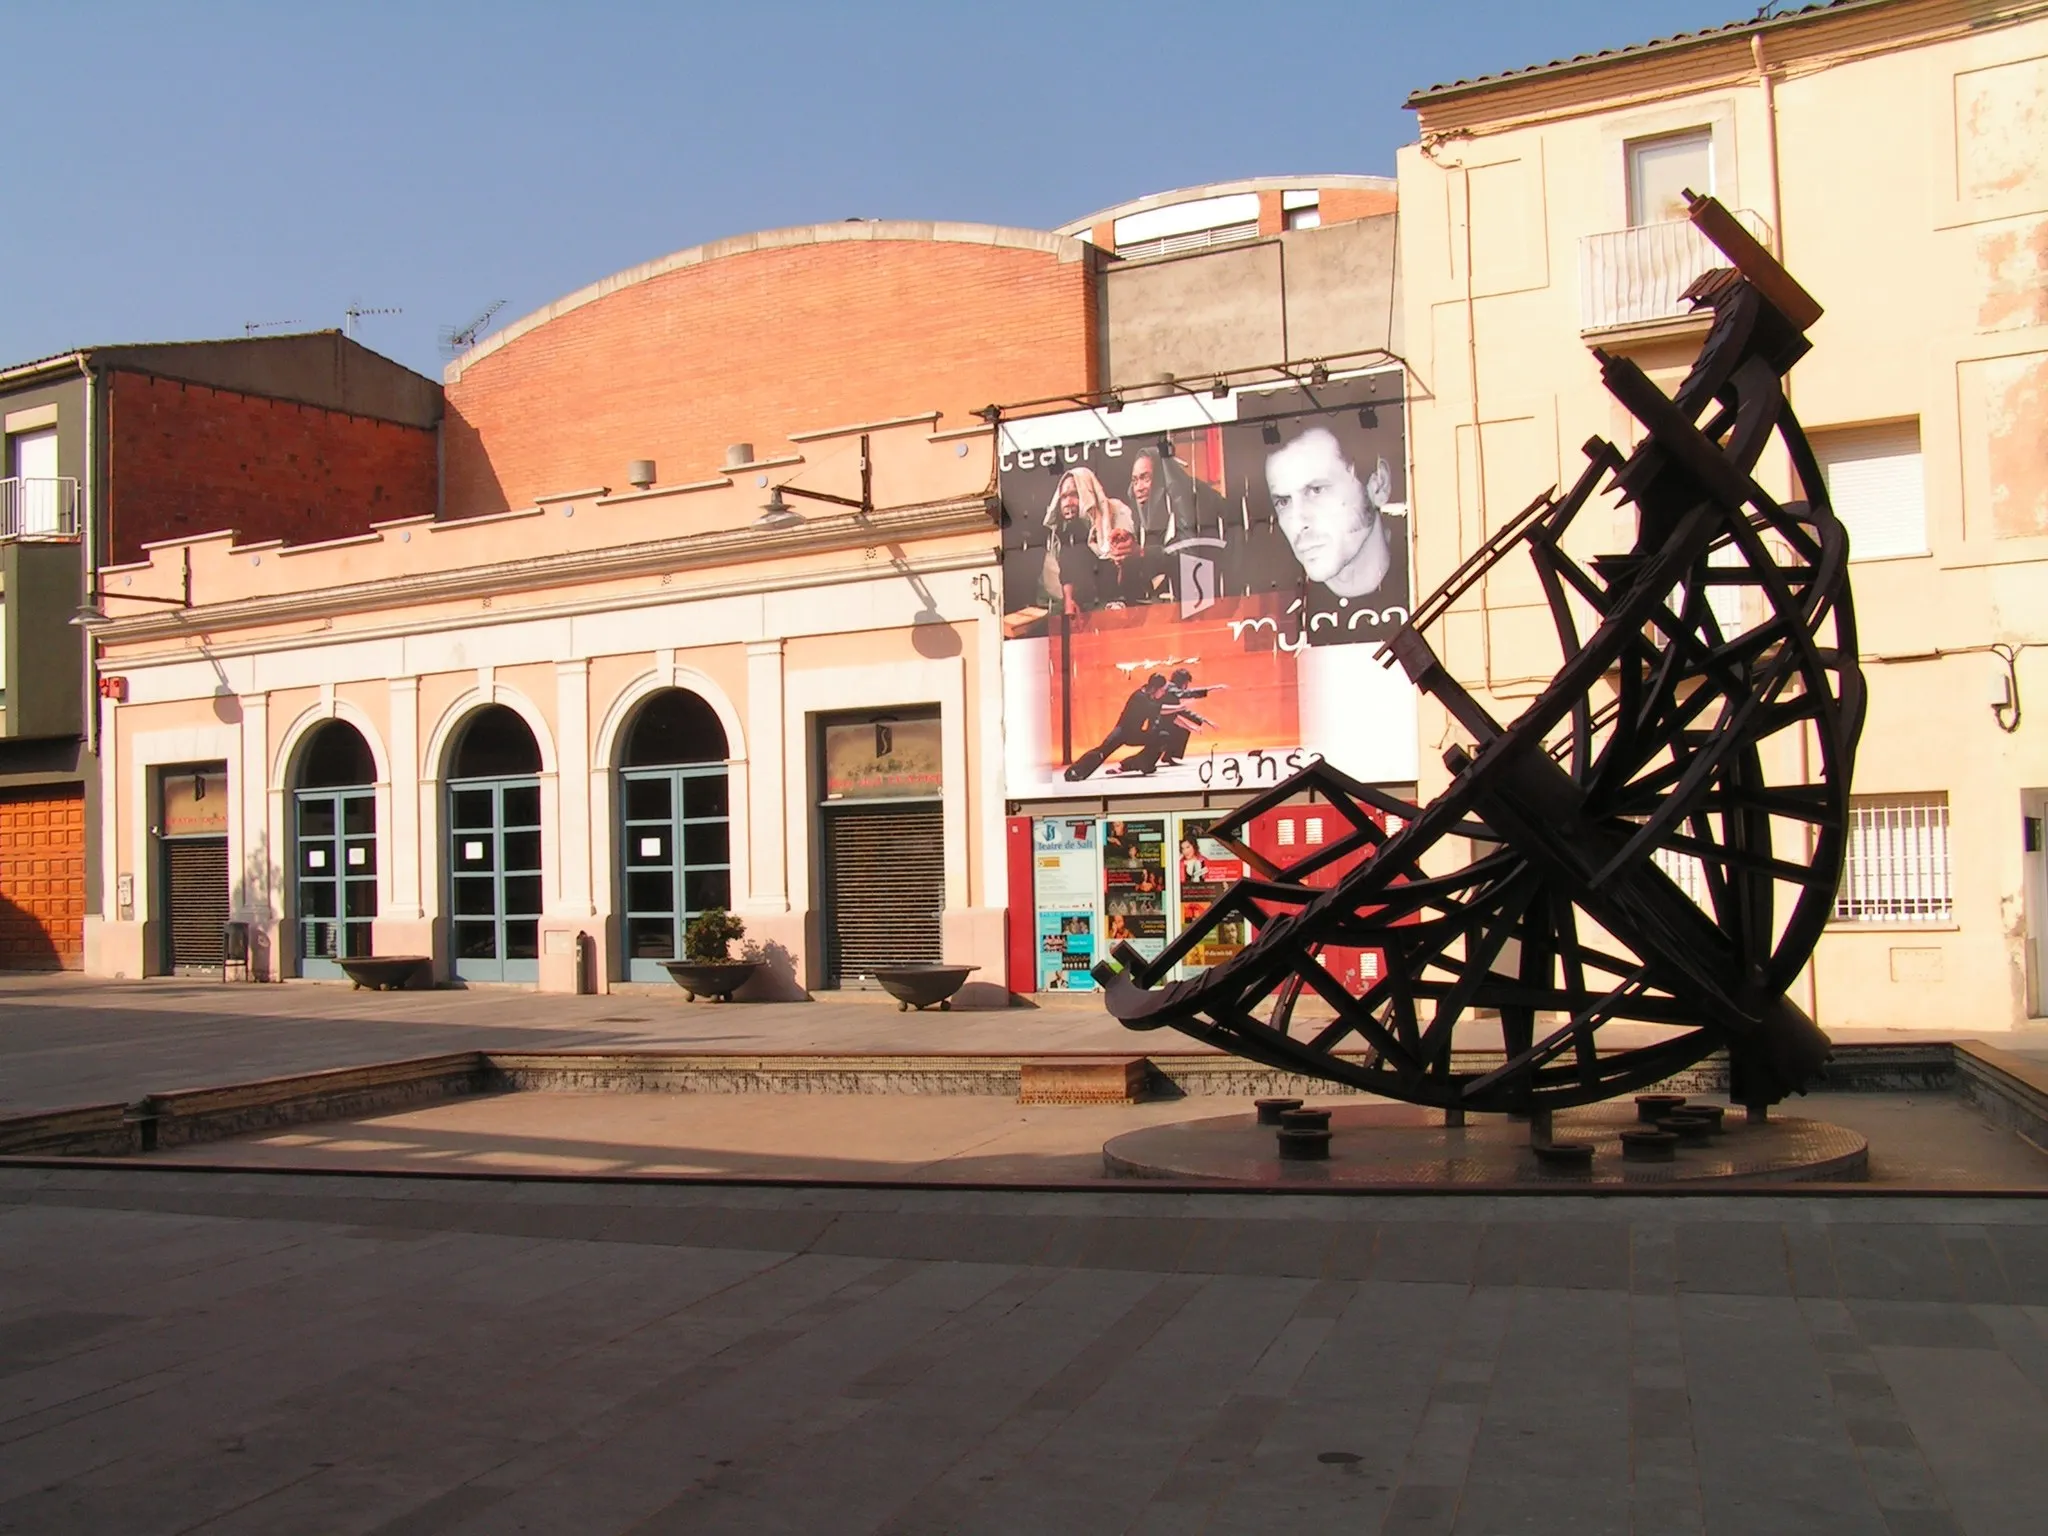 Photo showing: Theatre of Salt, at Plaça Sant Jaume in the city of Salt (Gironès). In the foreground is the sculpture Cúpula invertida (Inverted Cupula, 1997), by Josep Admetlla, with poetry on it by Carles Vivó, Antoni Puigvert and Xavier Otero.